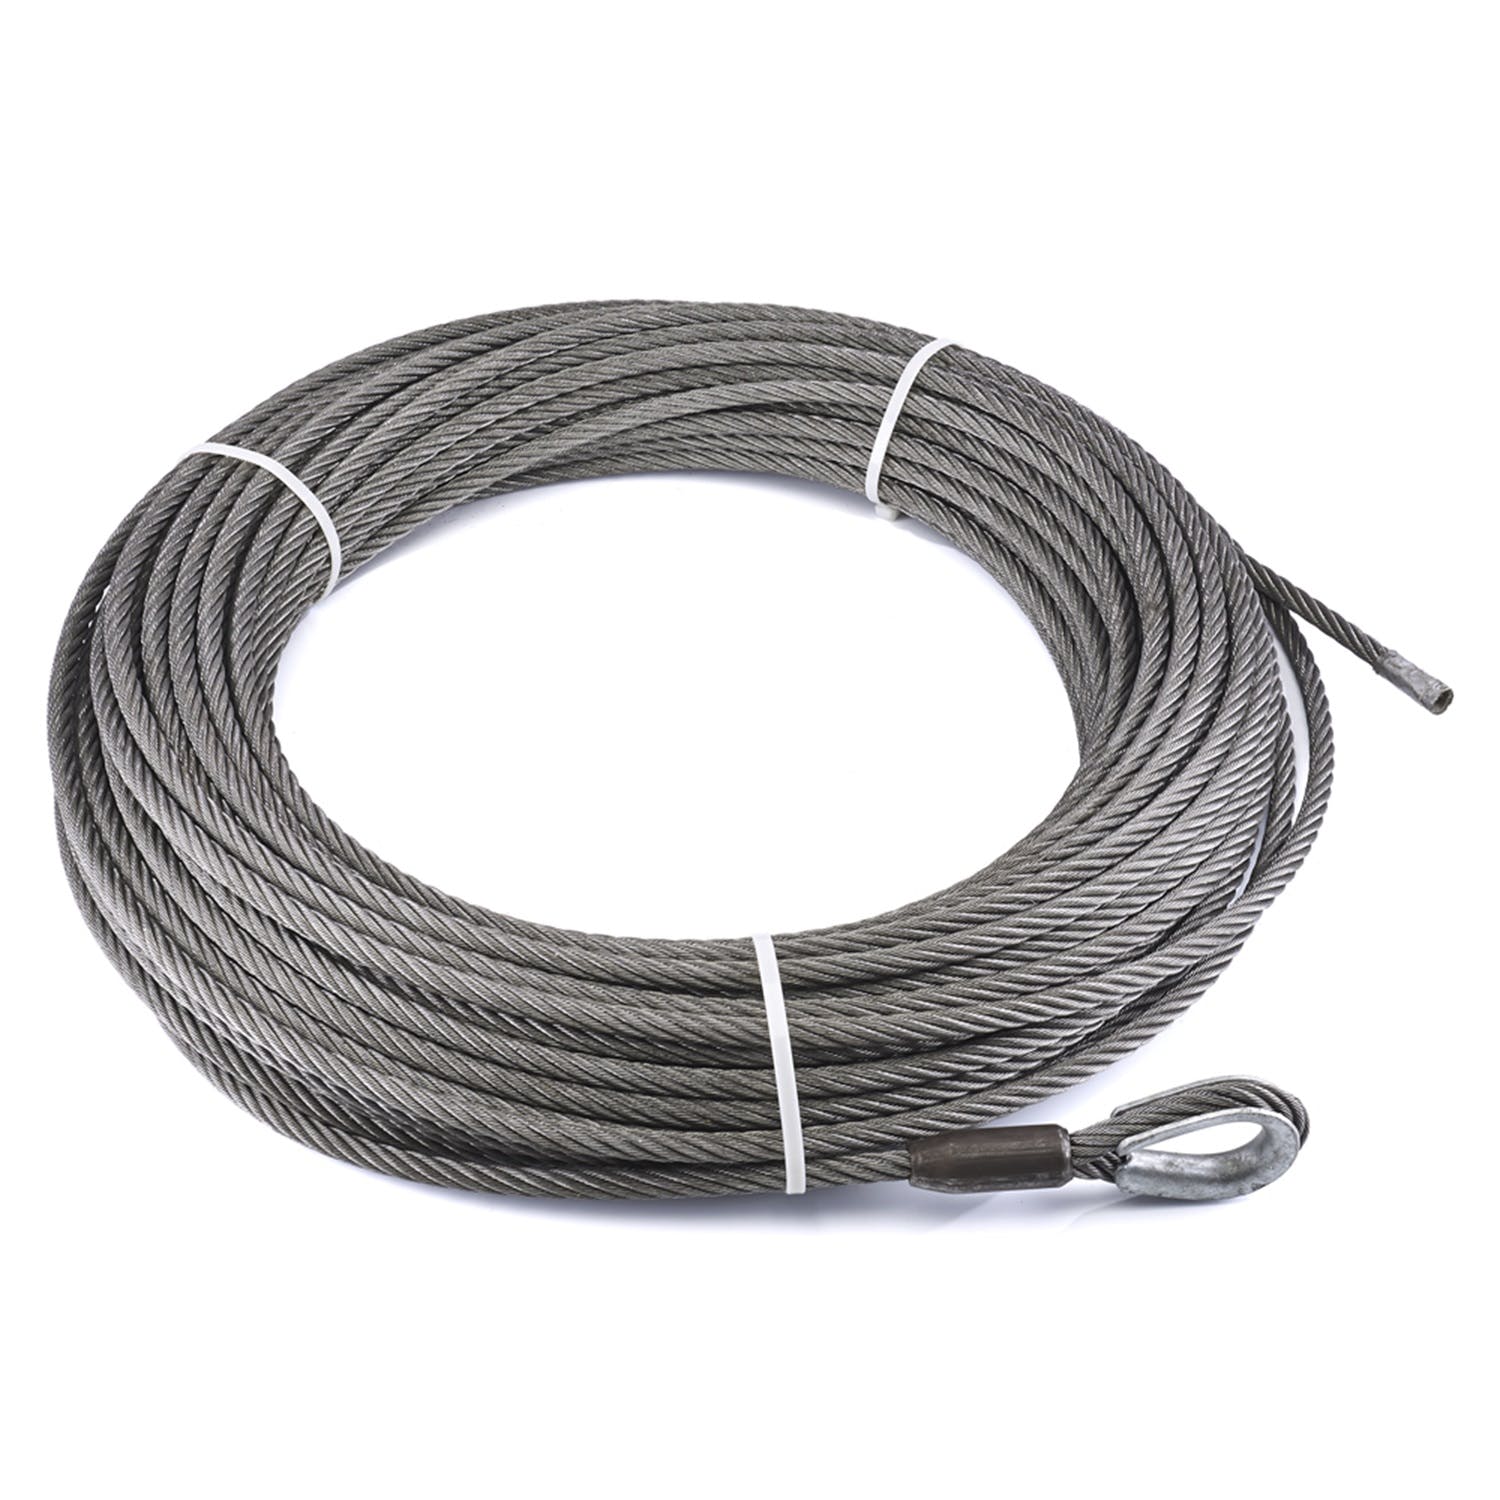 WARN 77452 Wire Rope